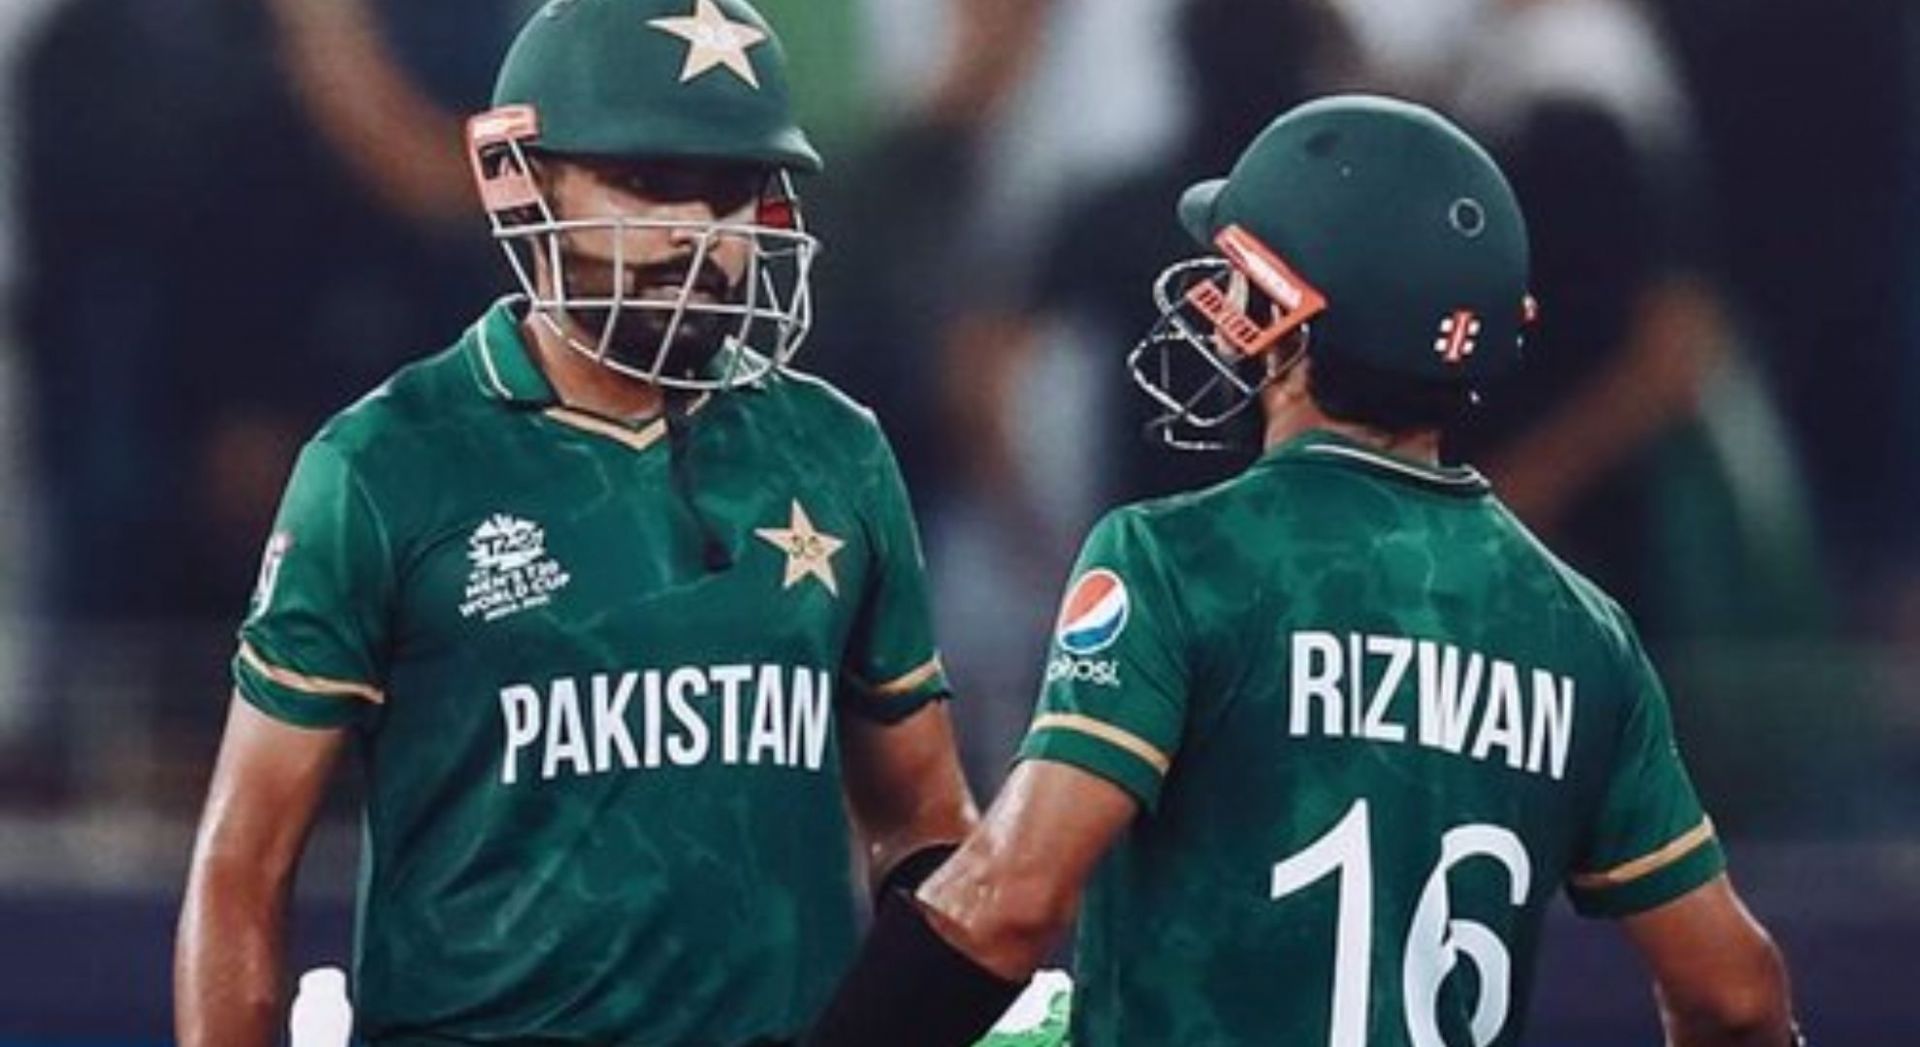 Babar Azam and Muhammad Rizwan share a great bond on and off the field.